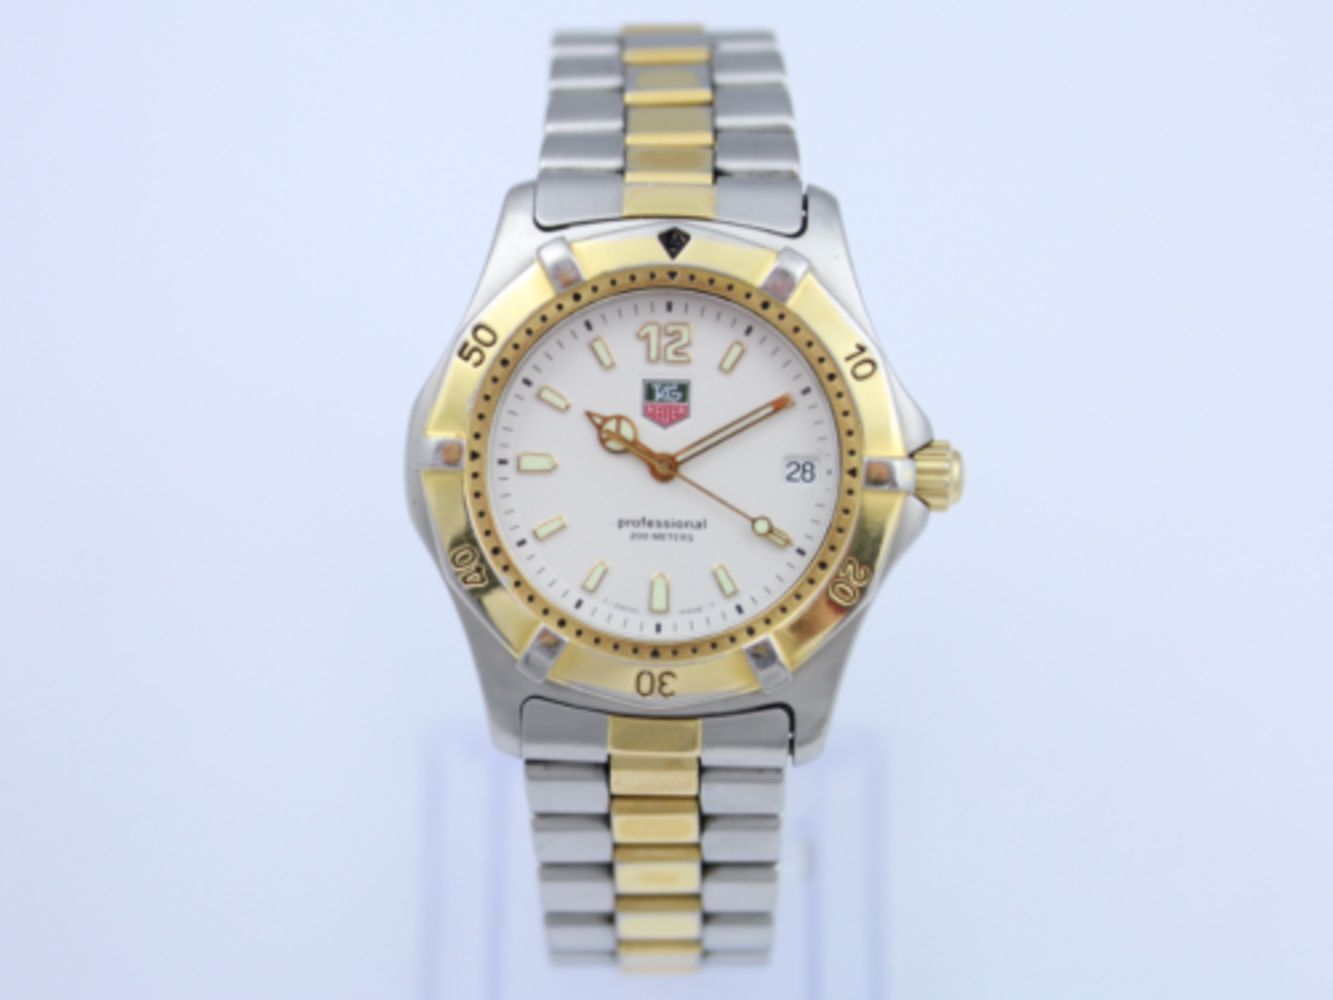 500 FRESH LOTS - WATCHES, ROLEX, BREITLING, OMEGA & DIAMOND RINGS, NECKLACES & MORE - LIQUIDATION SALE!  Ends Sunday 16th April 2023 10am